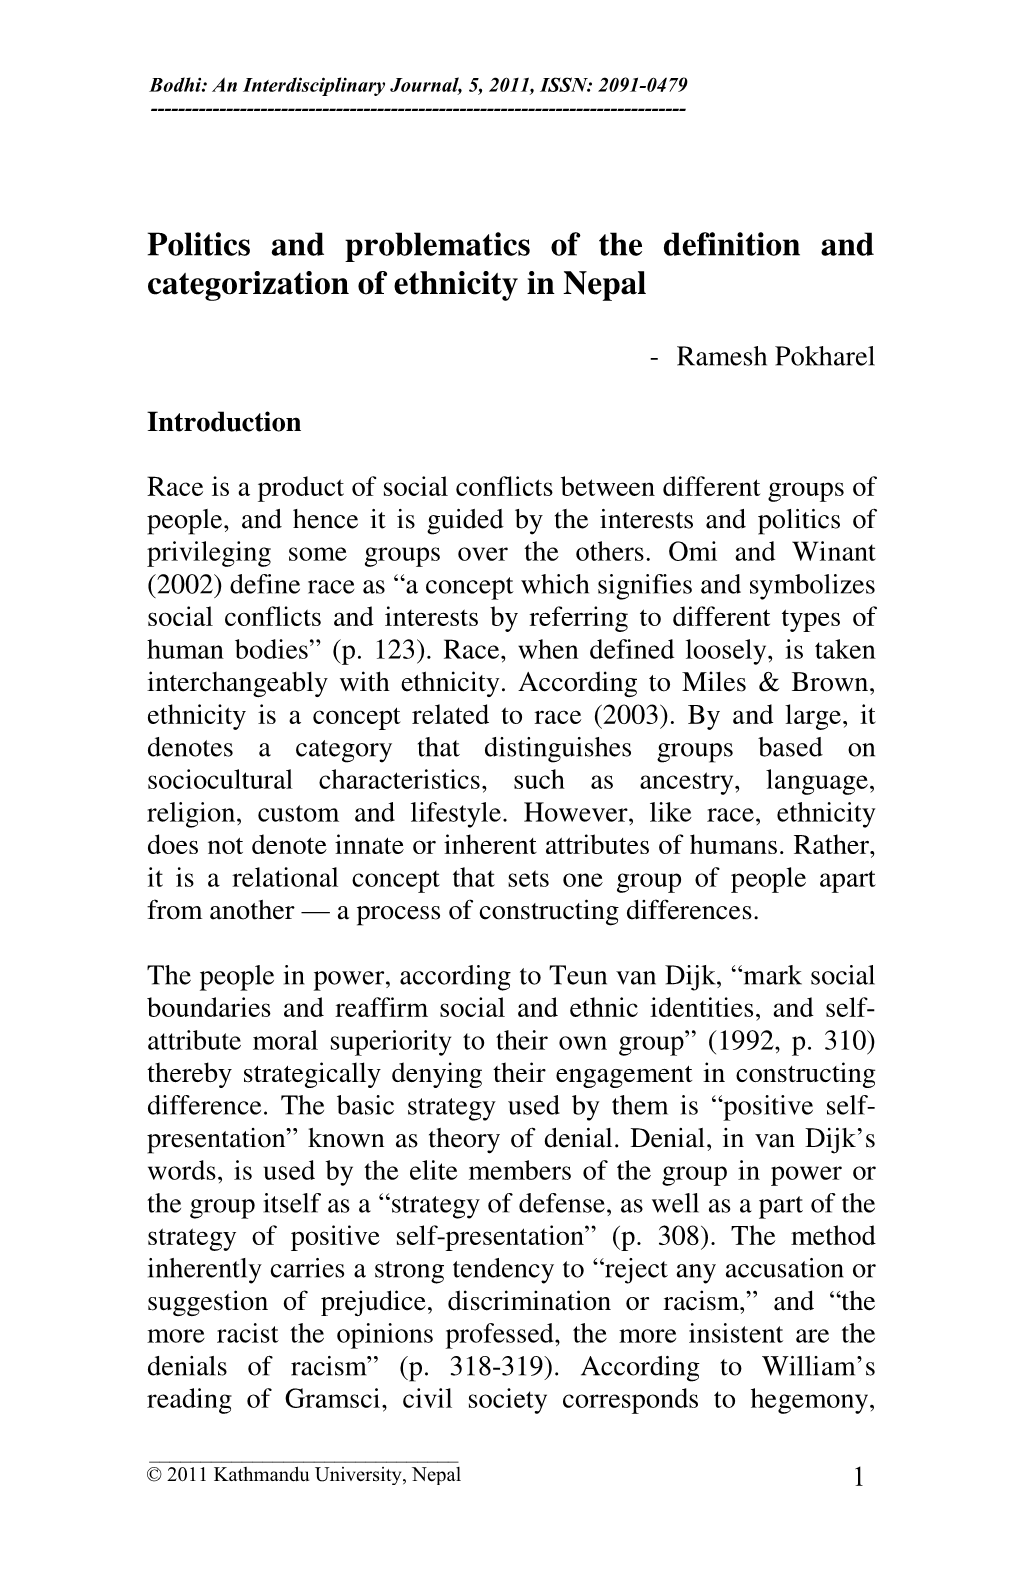 Politics and Problematics of the Definition and Categorization of Ethnicity in Nepal